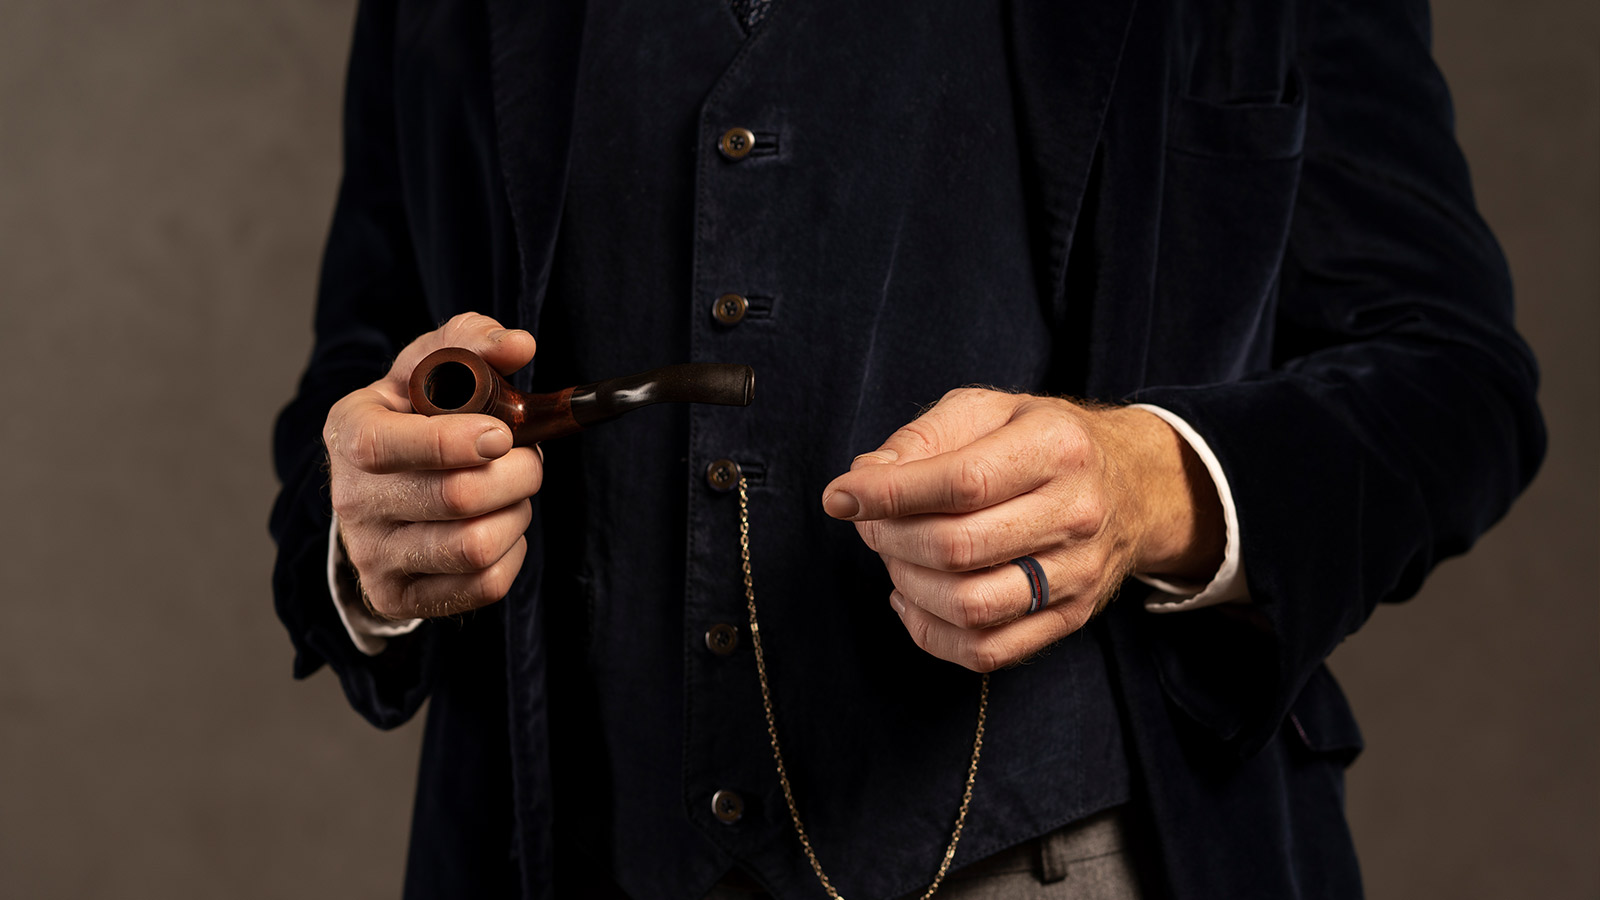 The man holds a cigarette pipe in his right hand and a men's ring in his left